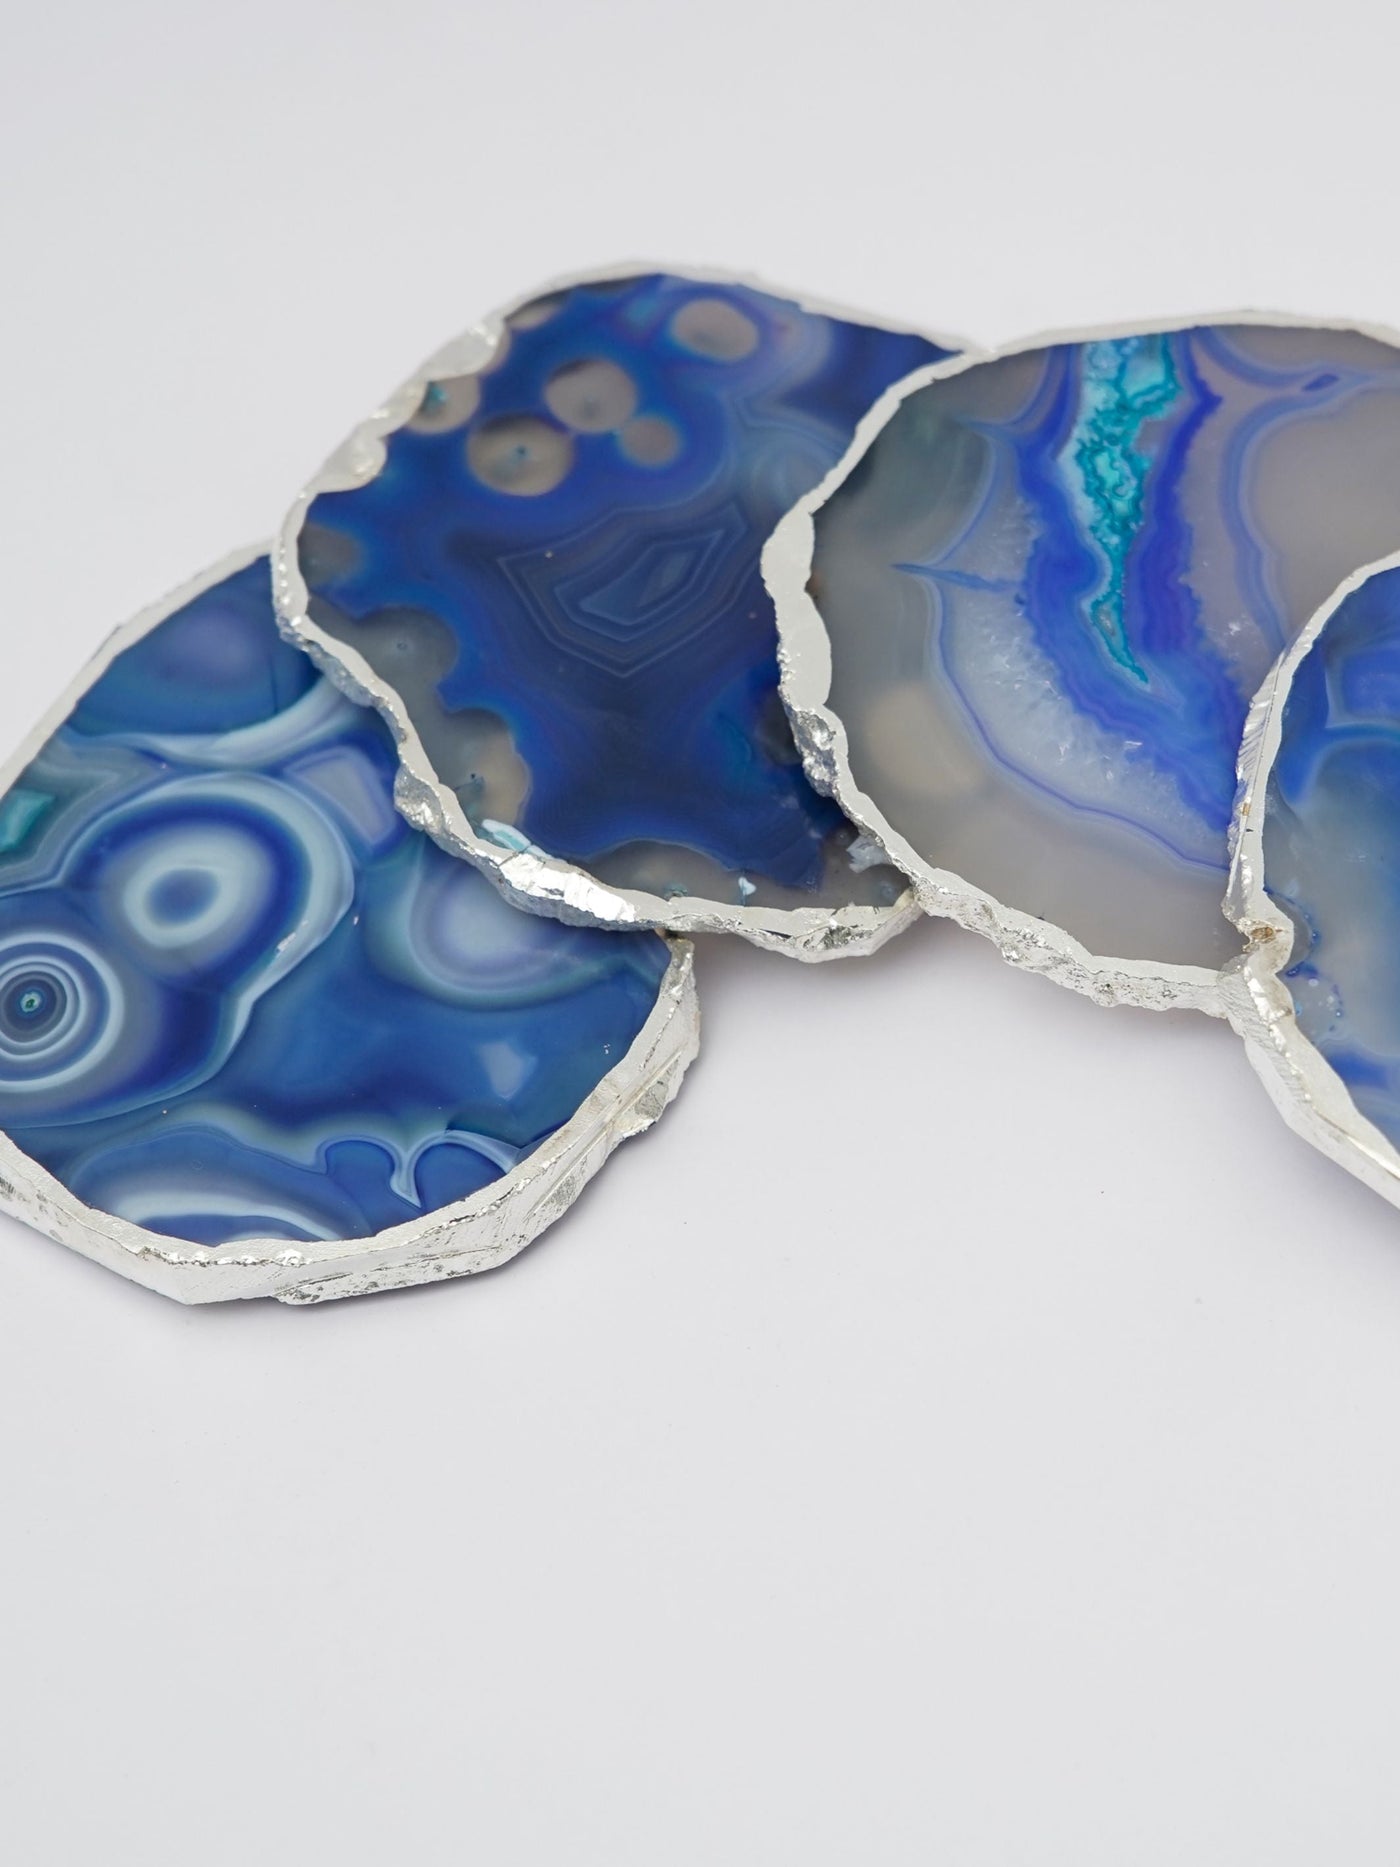 Coaster Set of 4 - Brazilian Agate Blue with Silver Plated edge